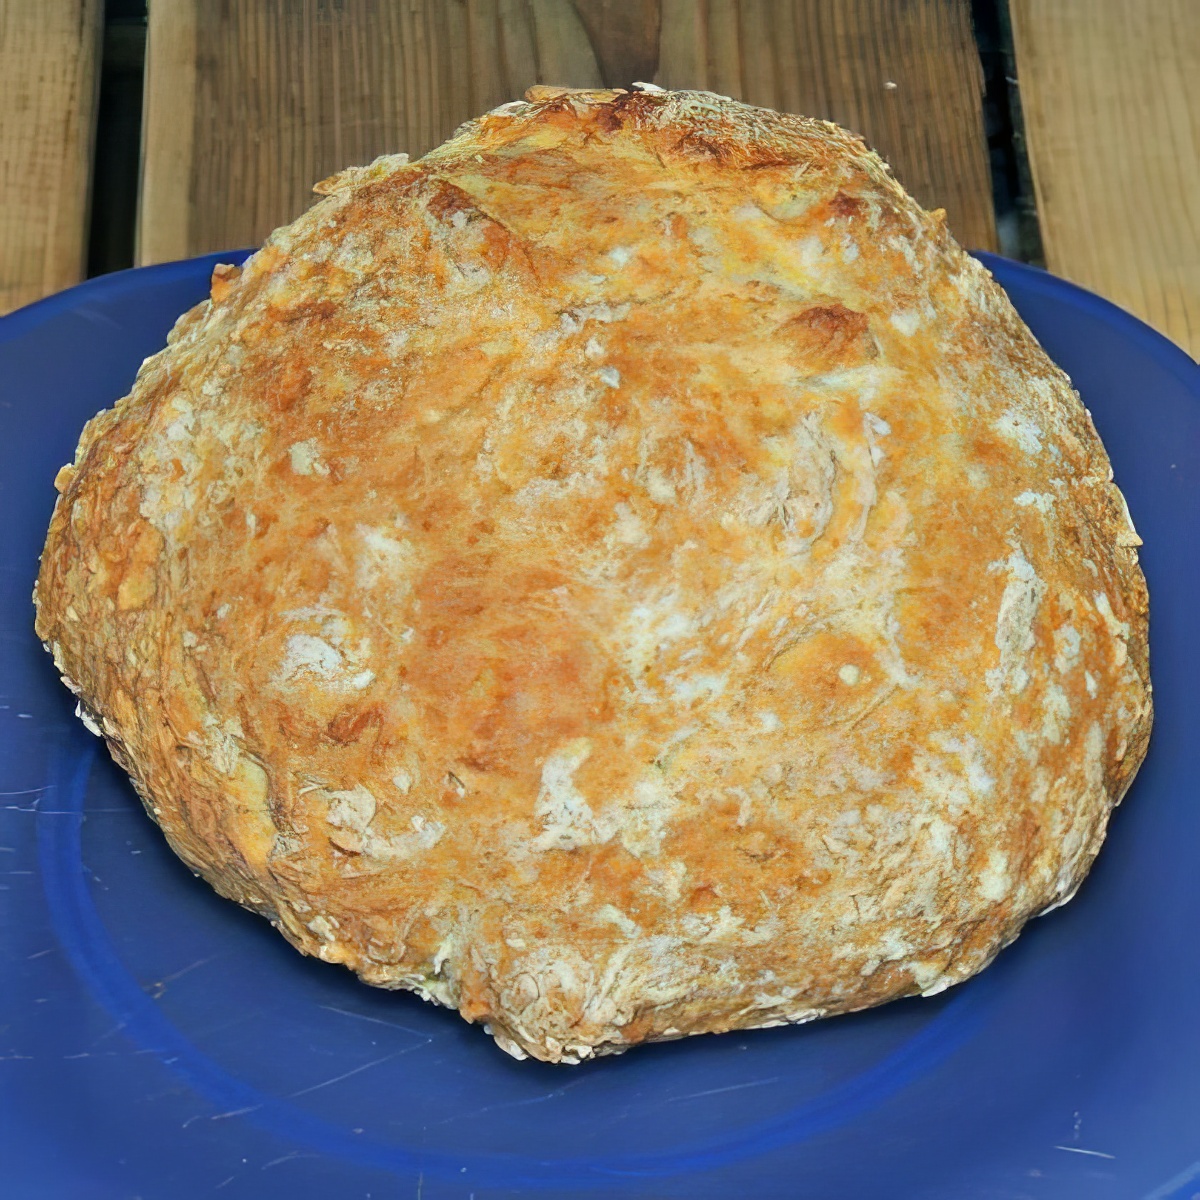 This Irish Soda Bread recipe will be a sure hit with the whole family!